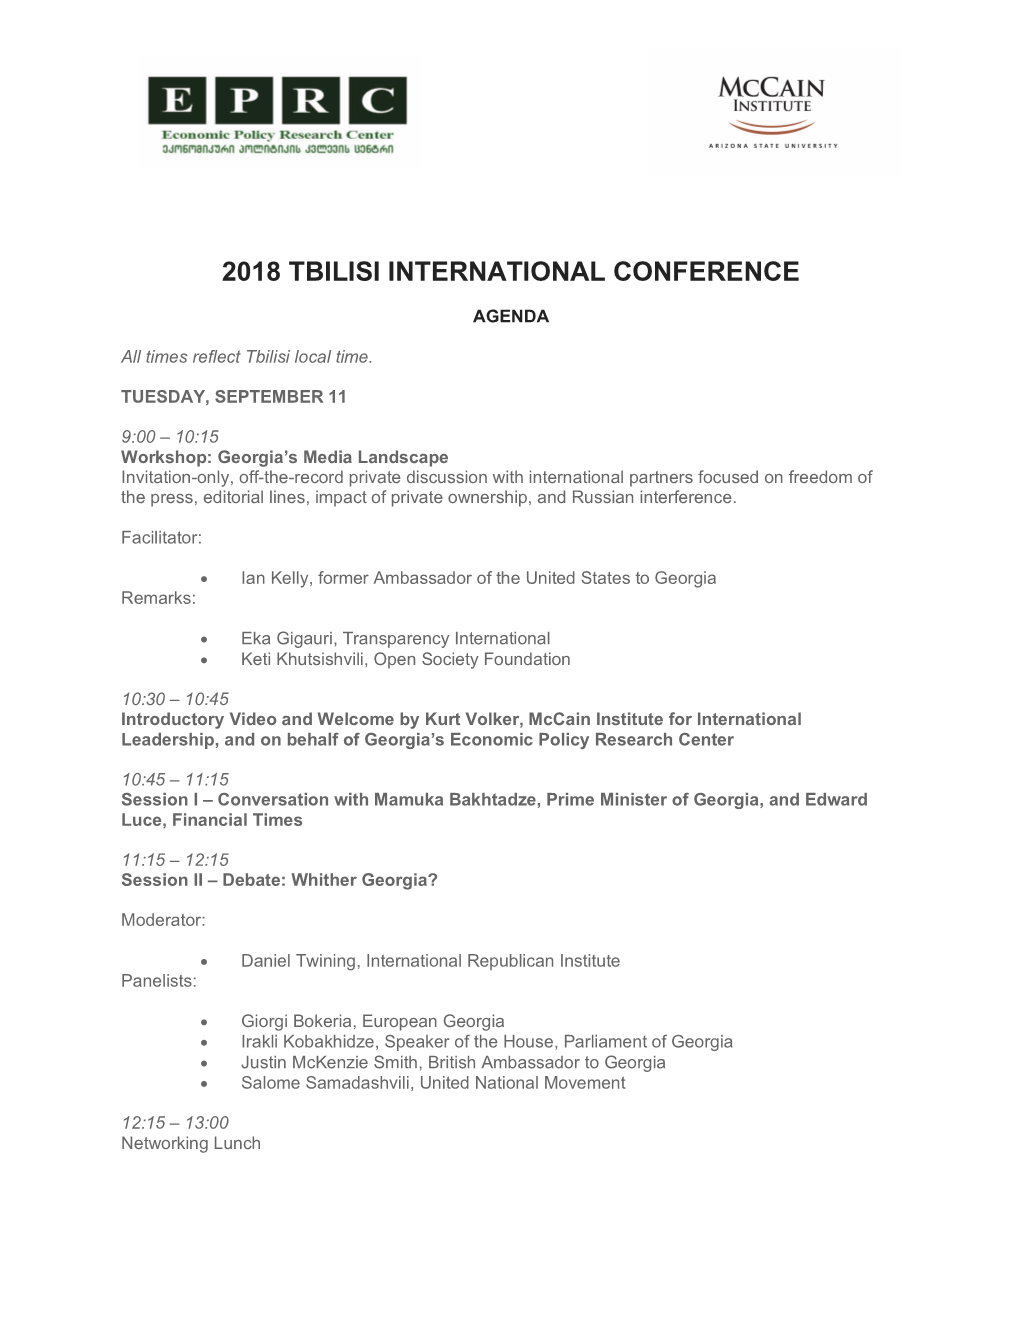 View the Full Agenda for the 2018 Tbilisi International Conference